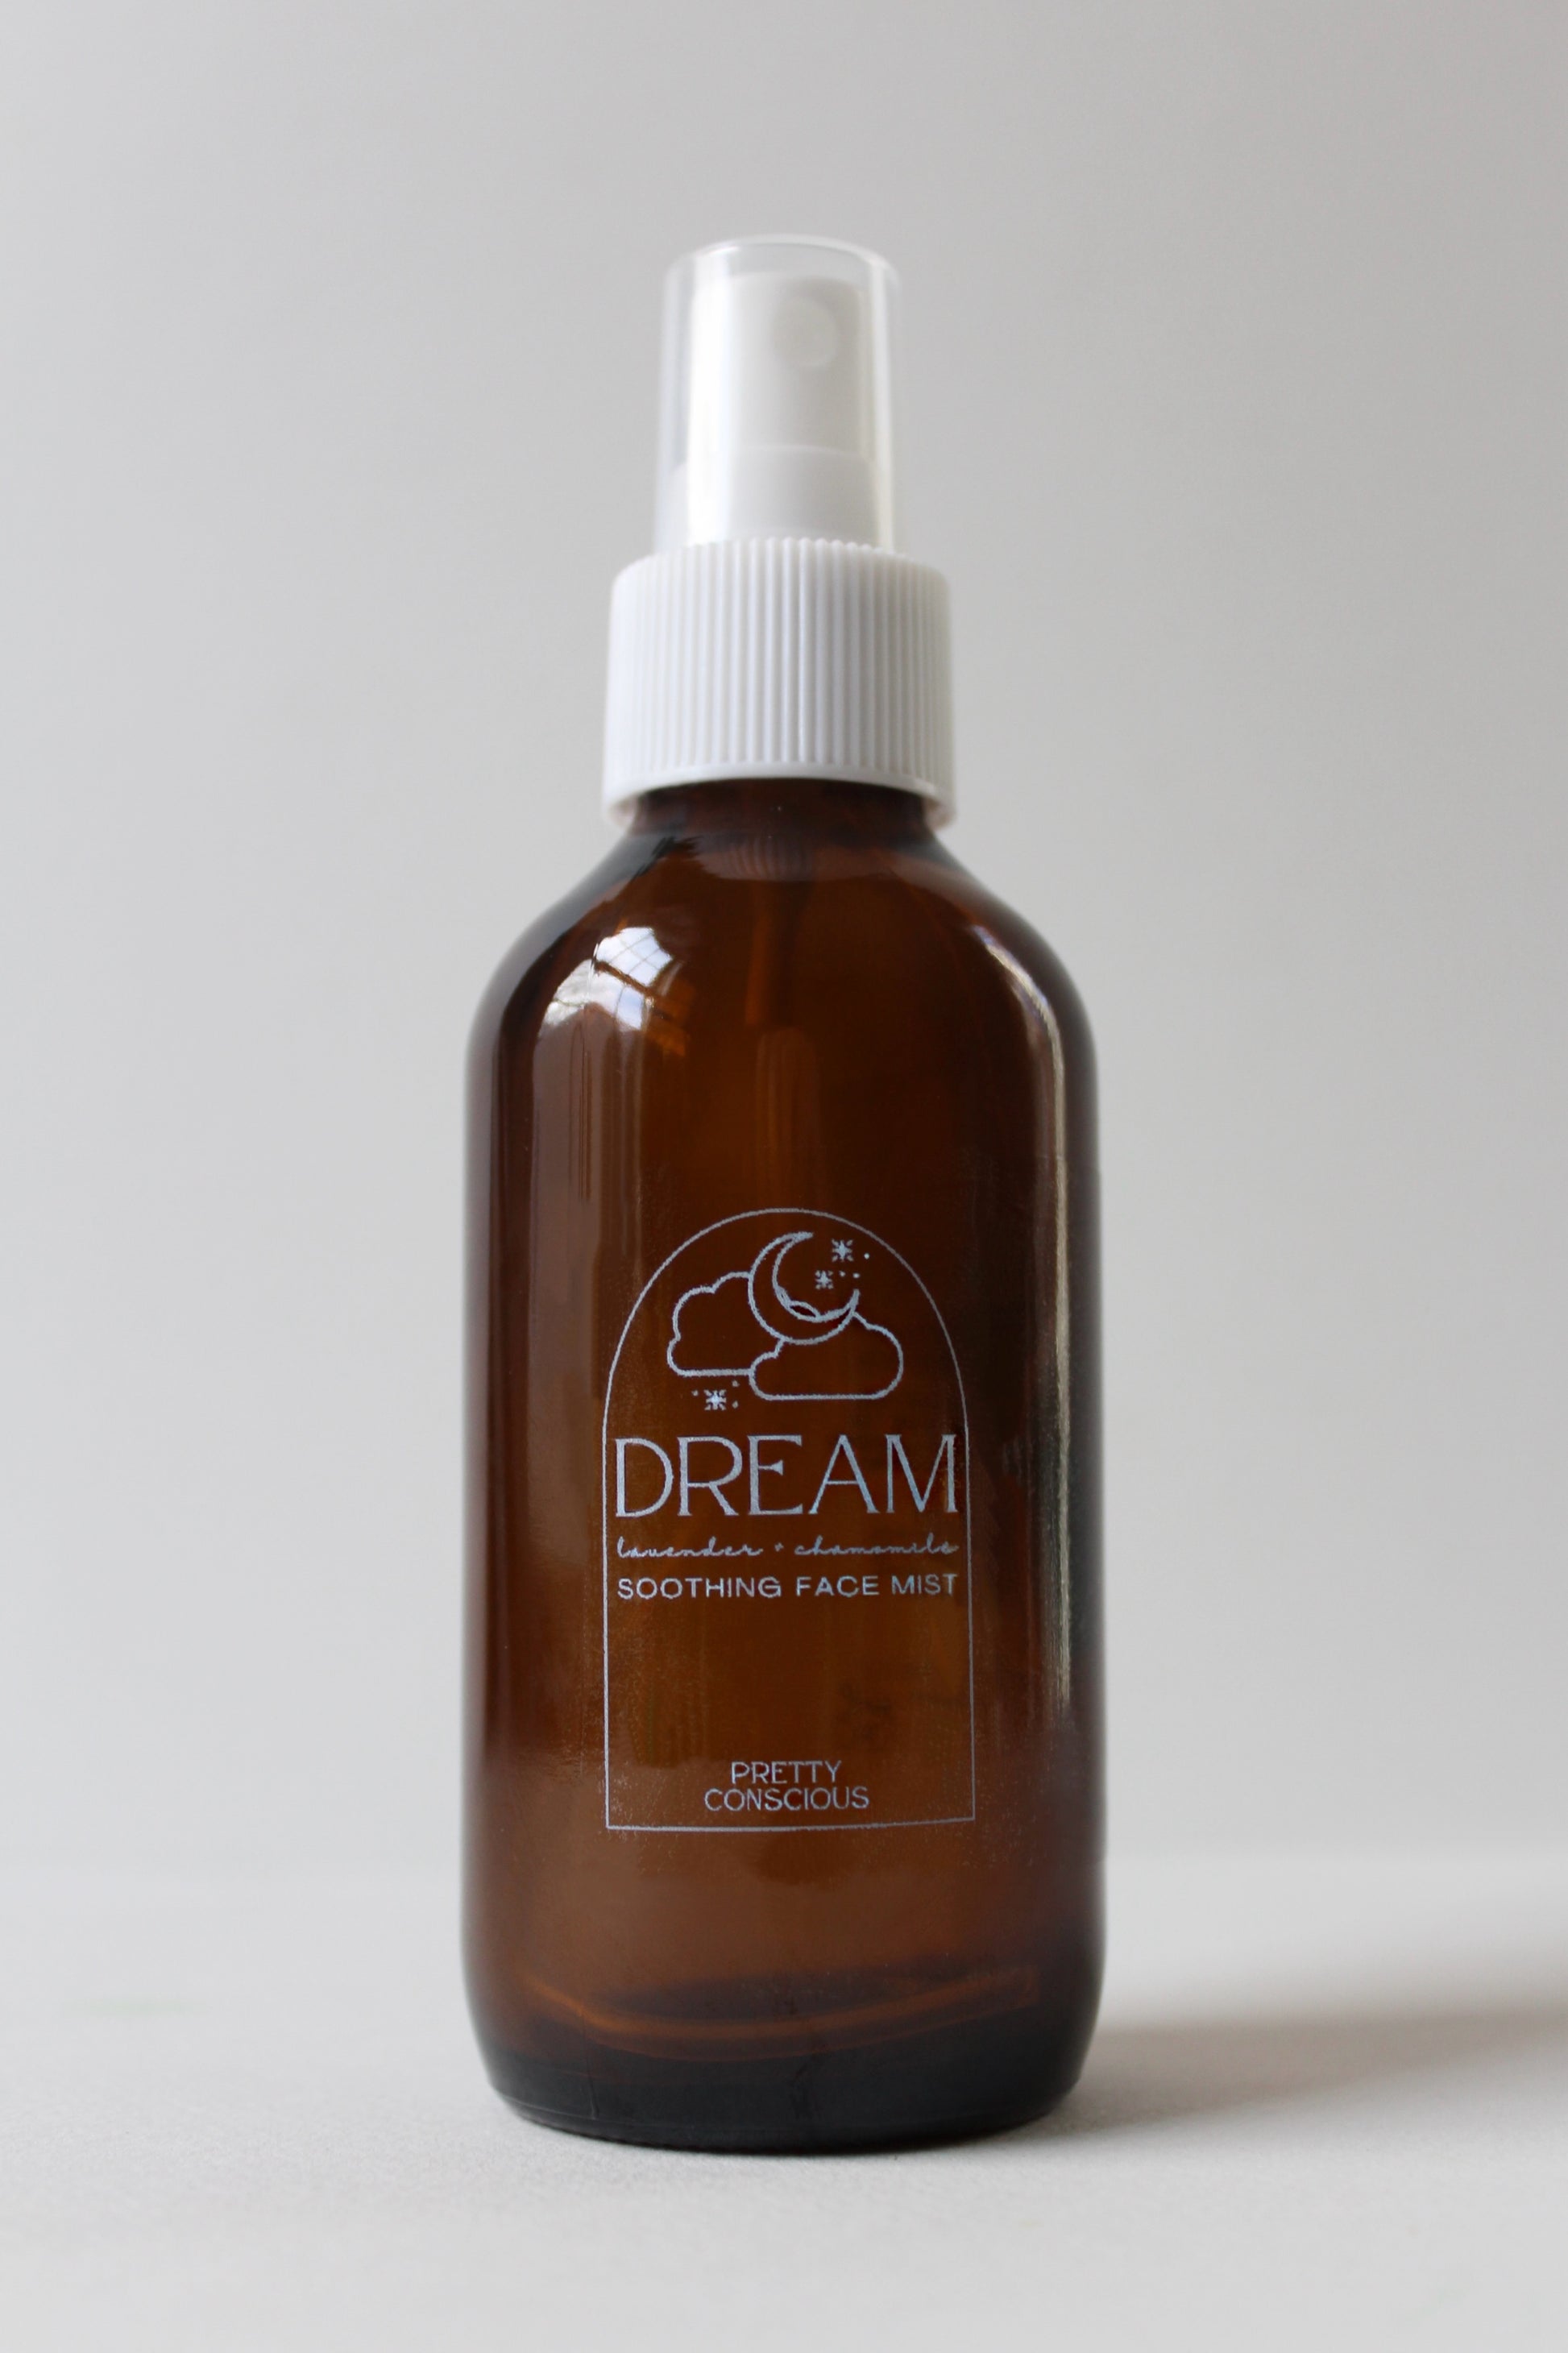 Pretty Conscious Beauty Dream Soothing Face Mist